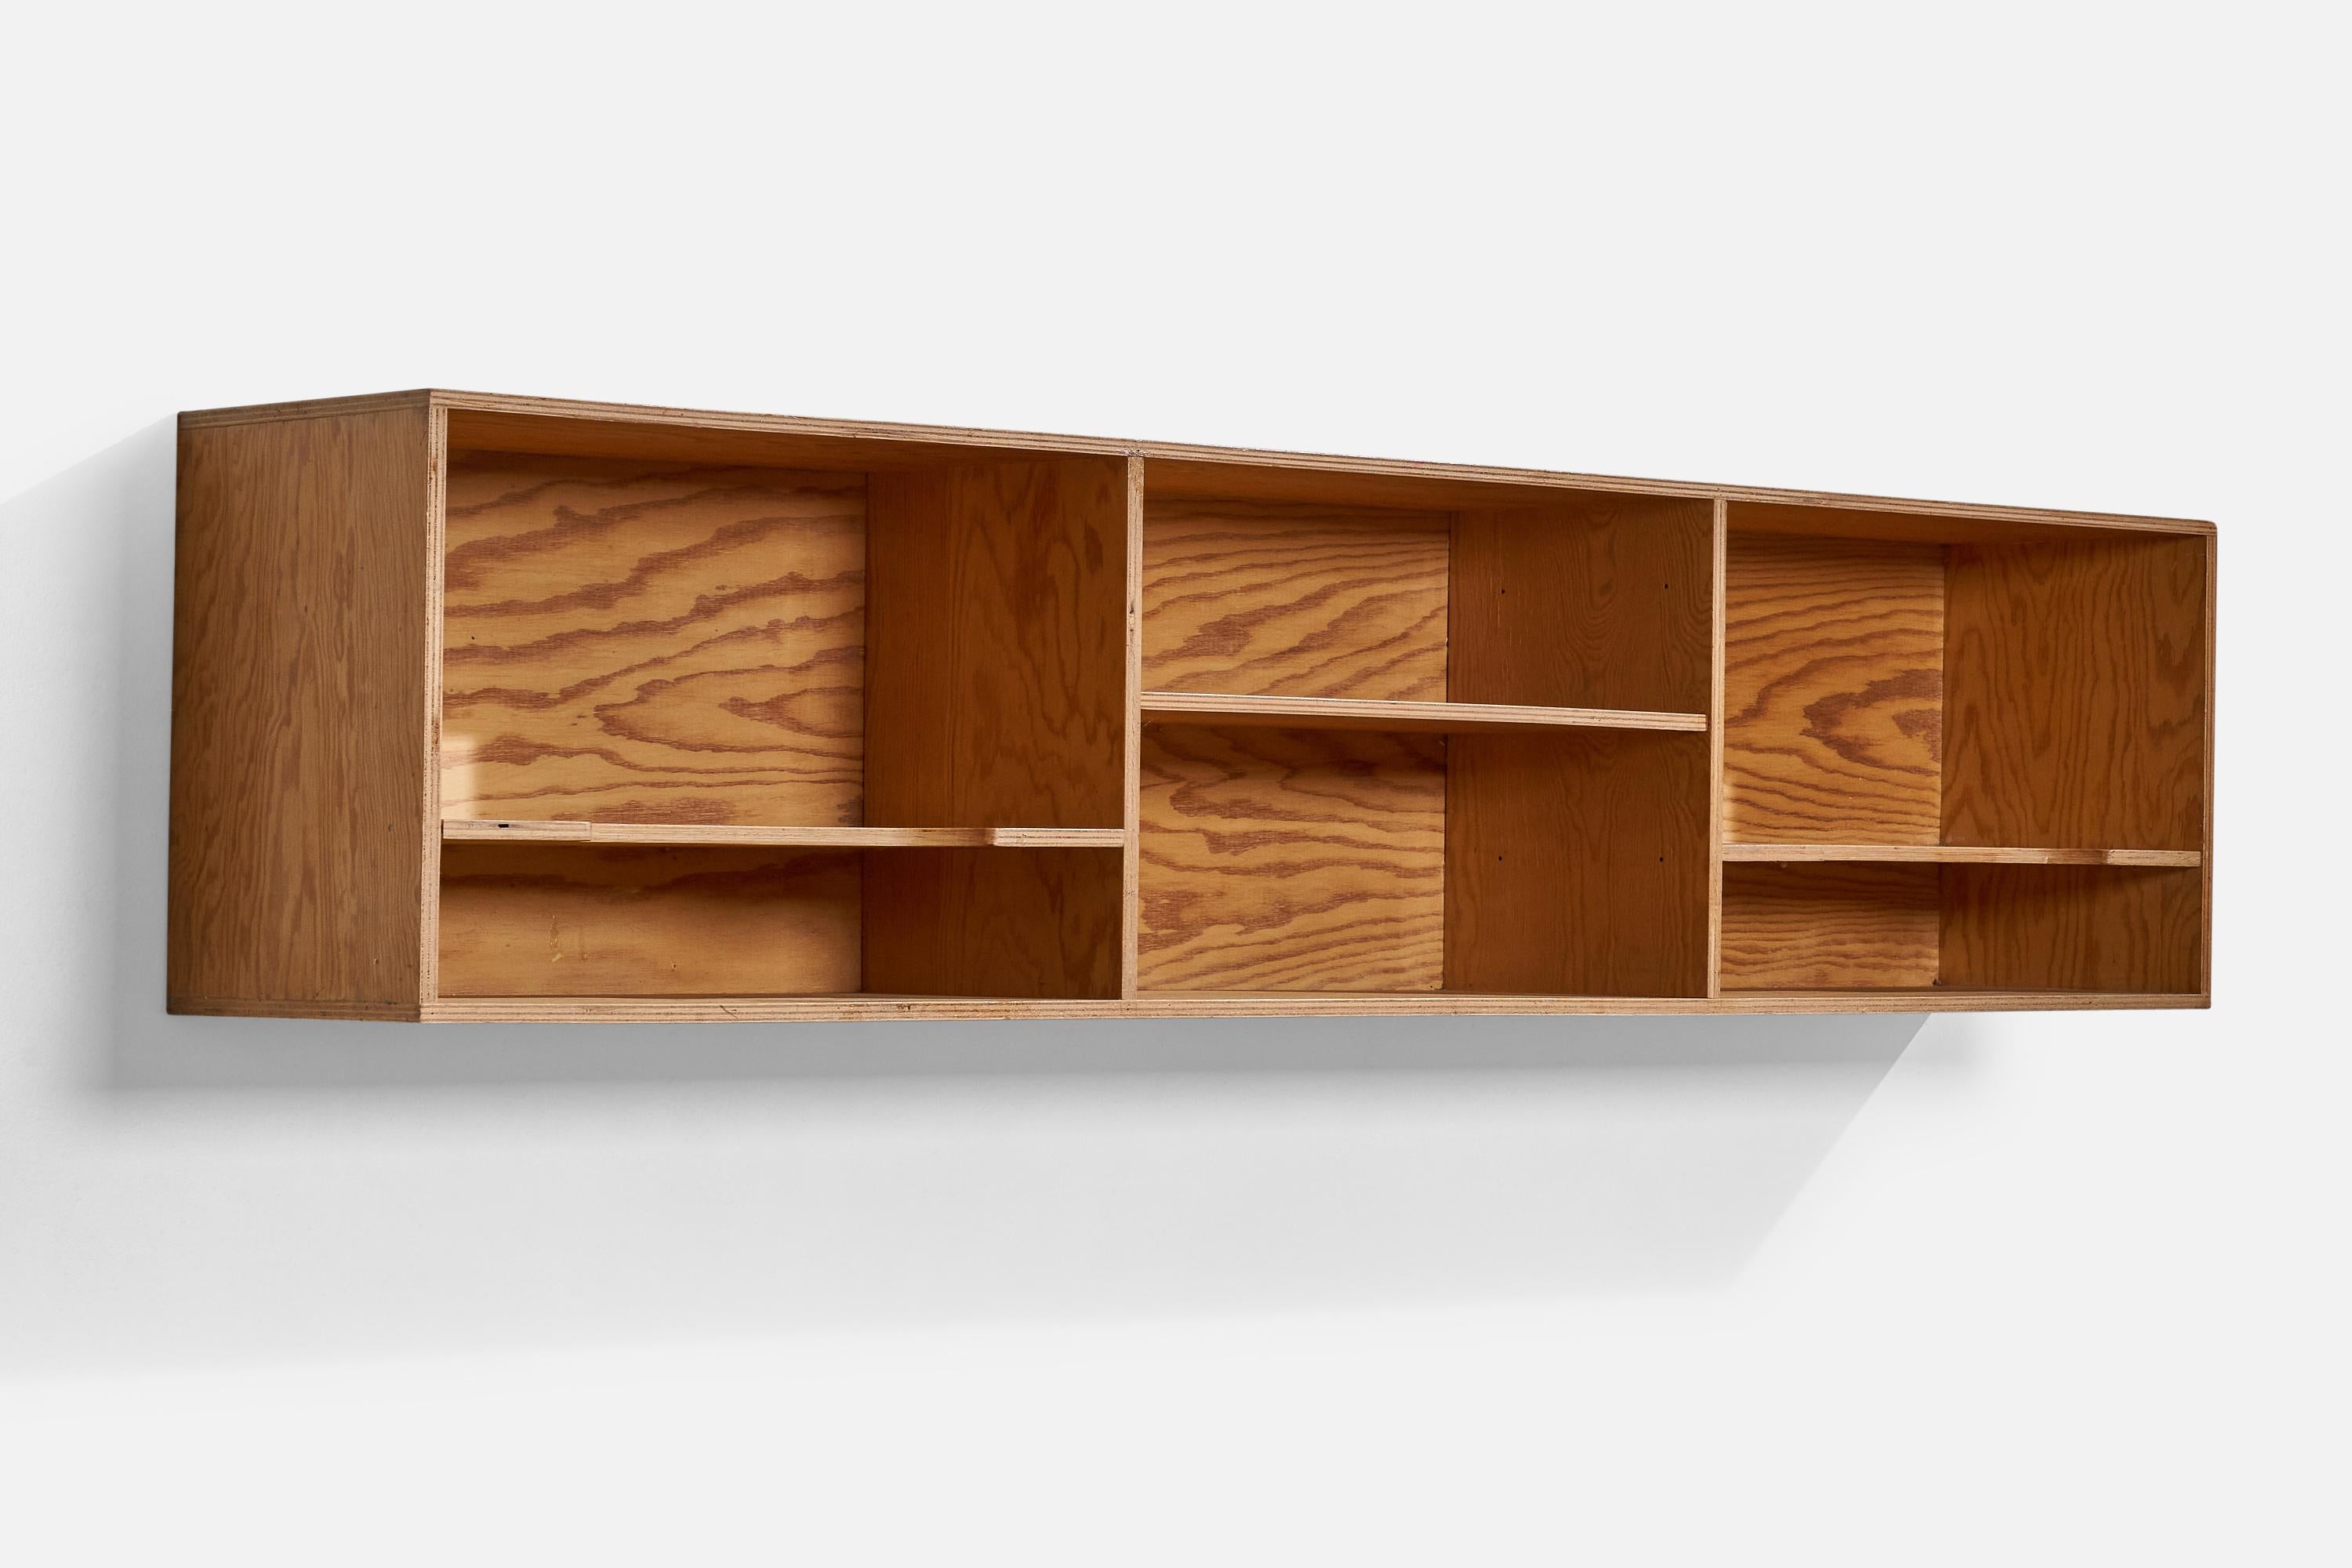 A pine wall shelf or cabinet designed and produced in Sweden, c. 1960s.

Currently missing wall mounting brackets. Will require professional installation.